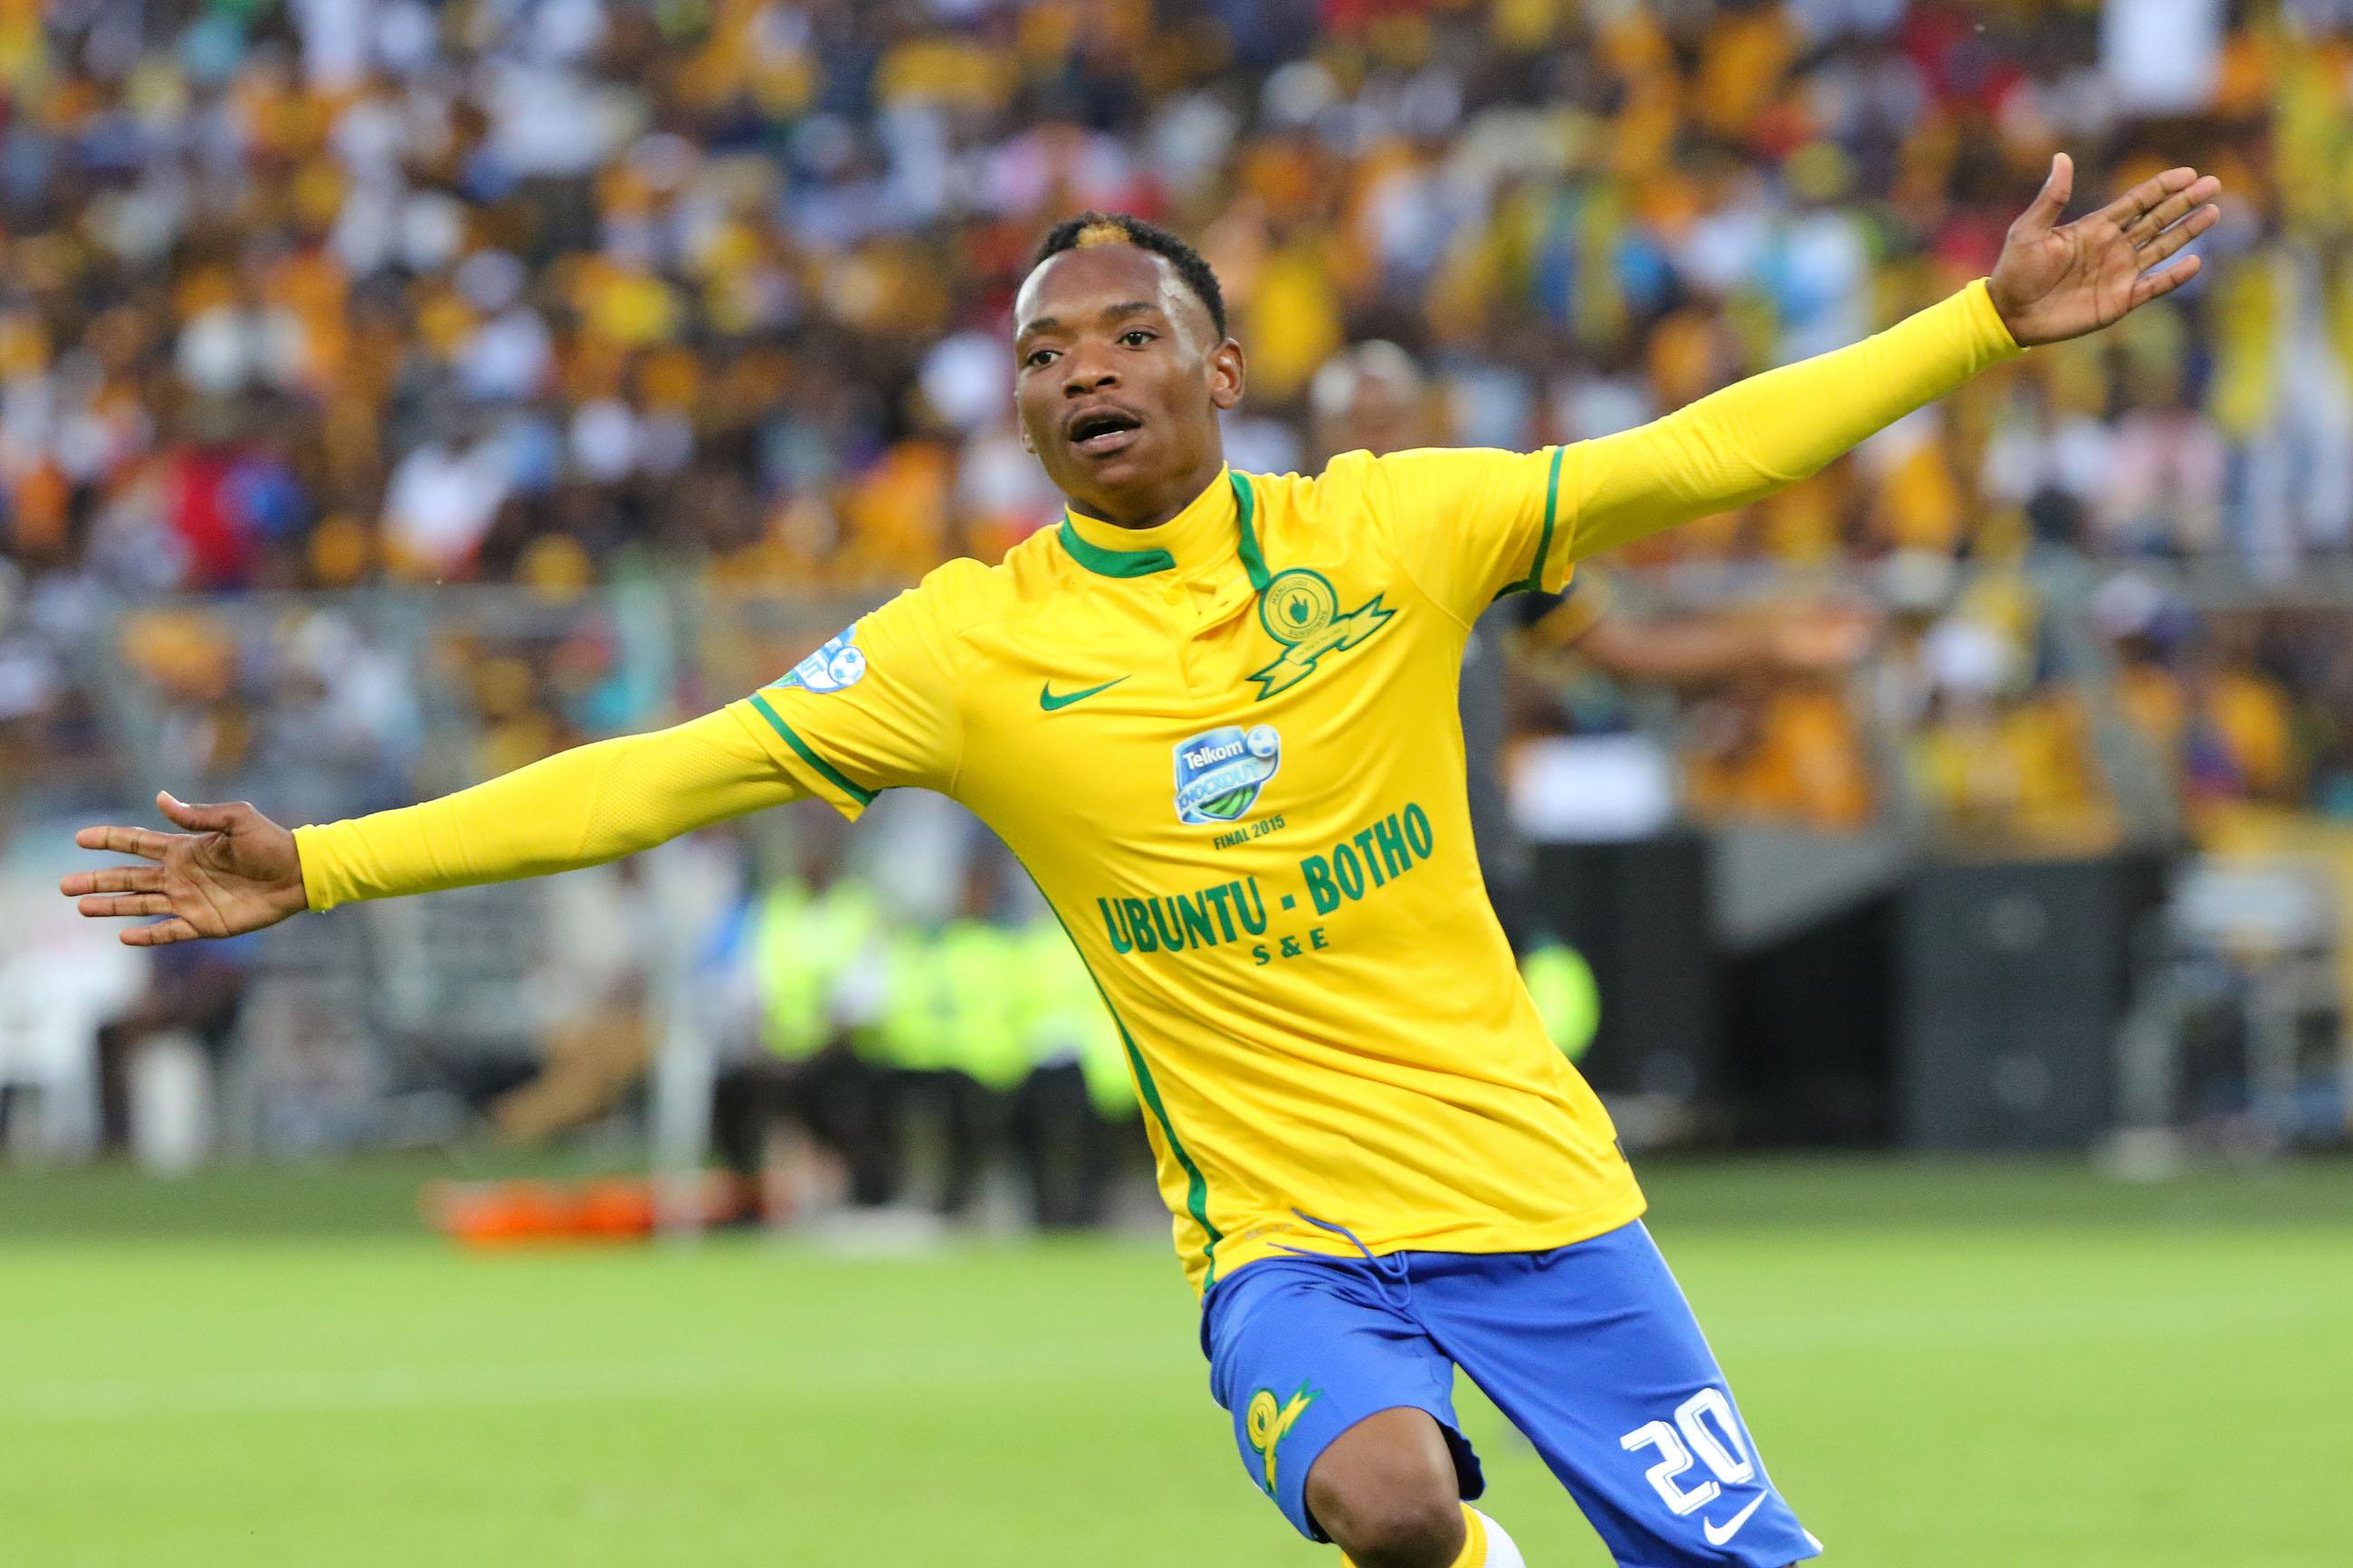 Sundowns look to keep up strong form